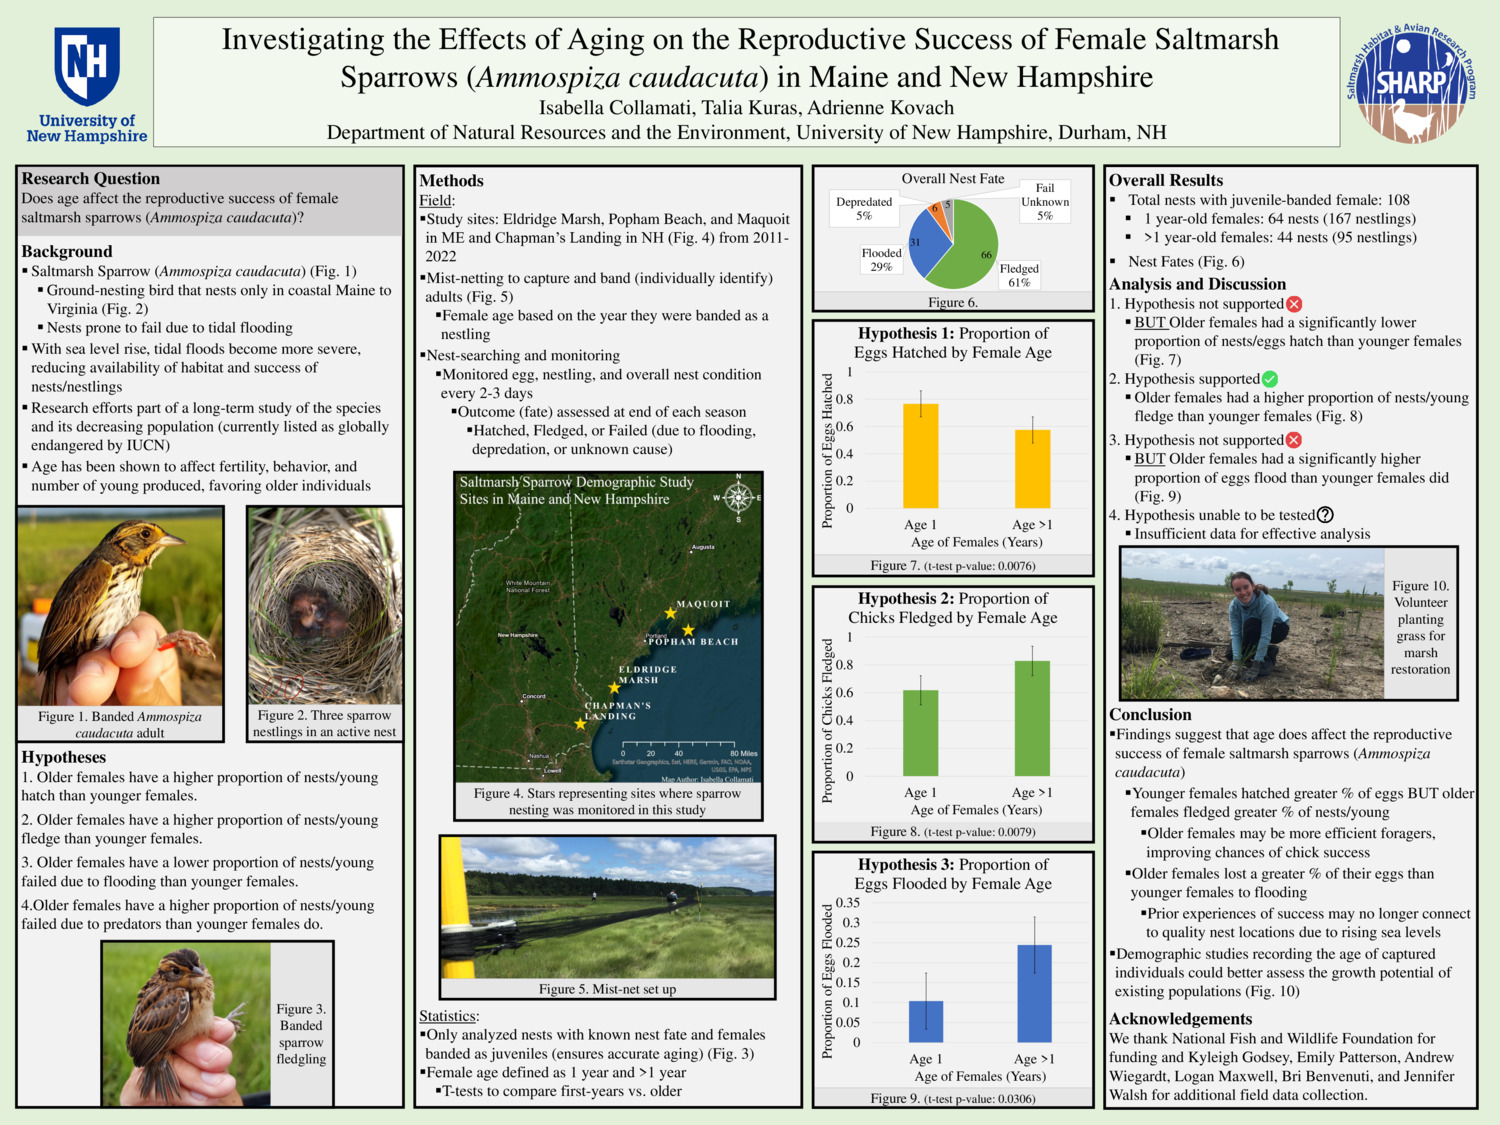 Investigating The Effects Of Aging On The Reproductive Success Of Female Saltmarsh Sparrows (Ammospiza Caudacuta) In Maine And New Hampshire by irc1012